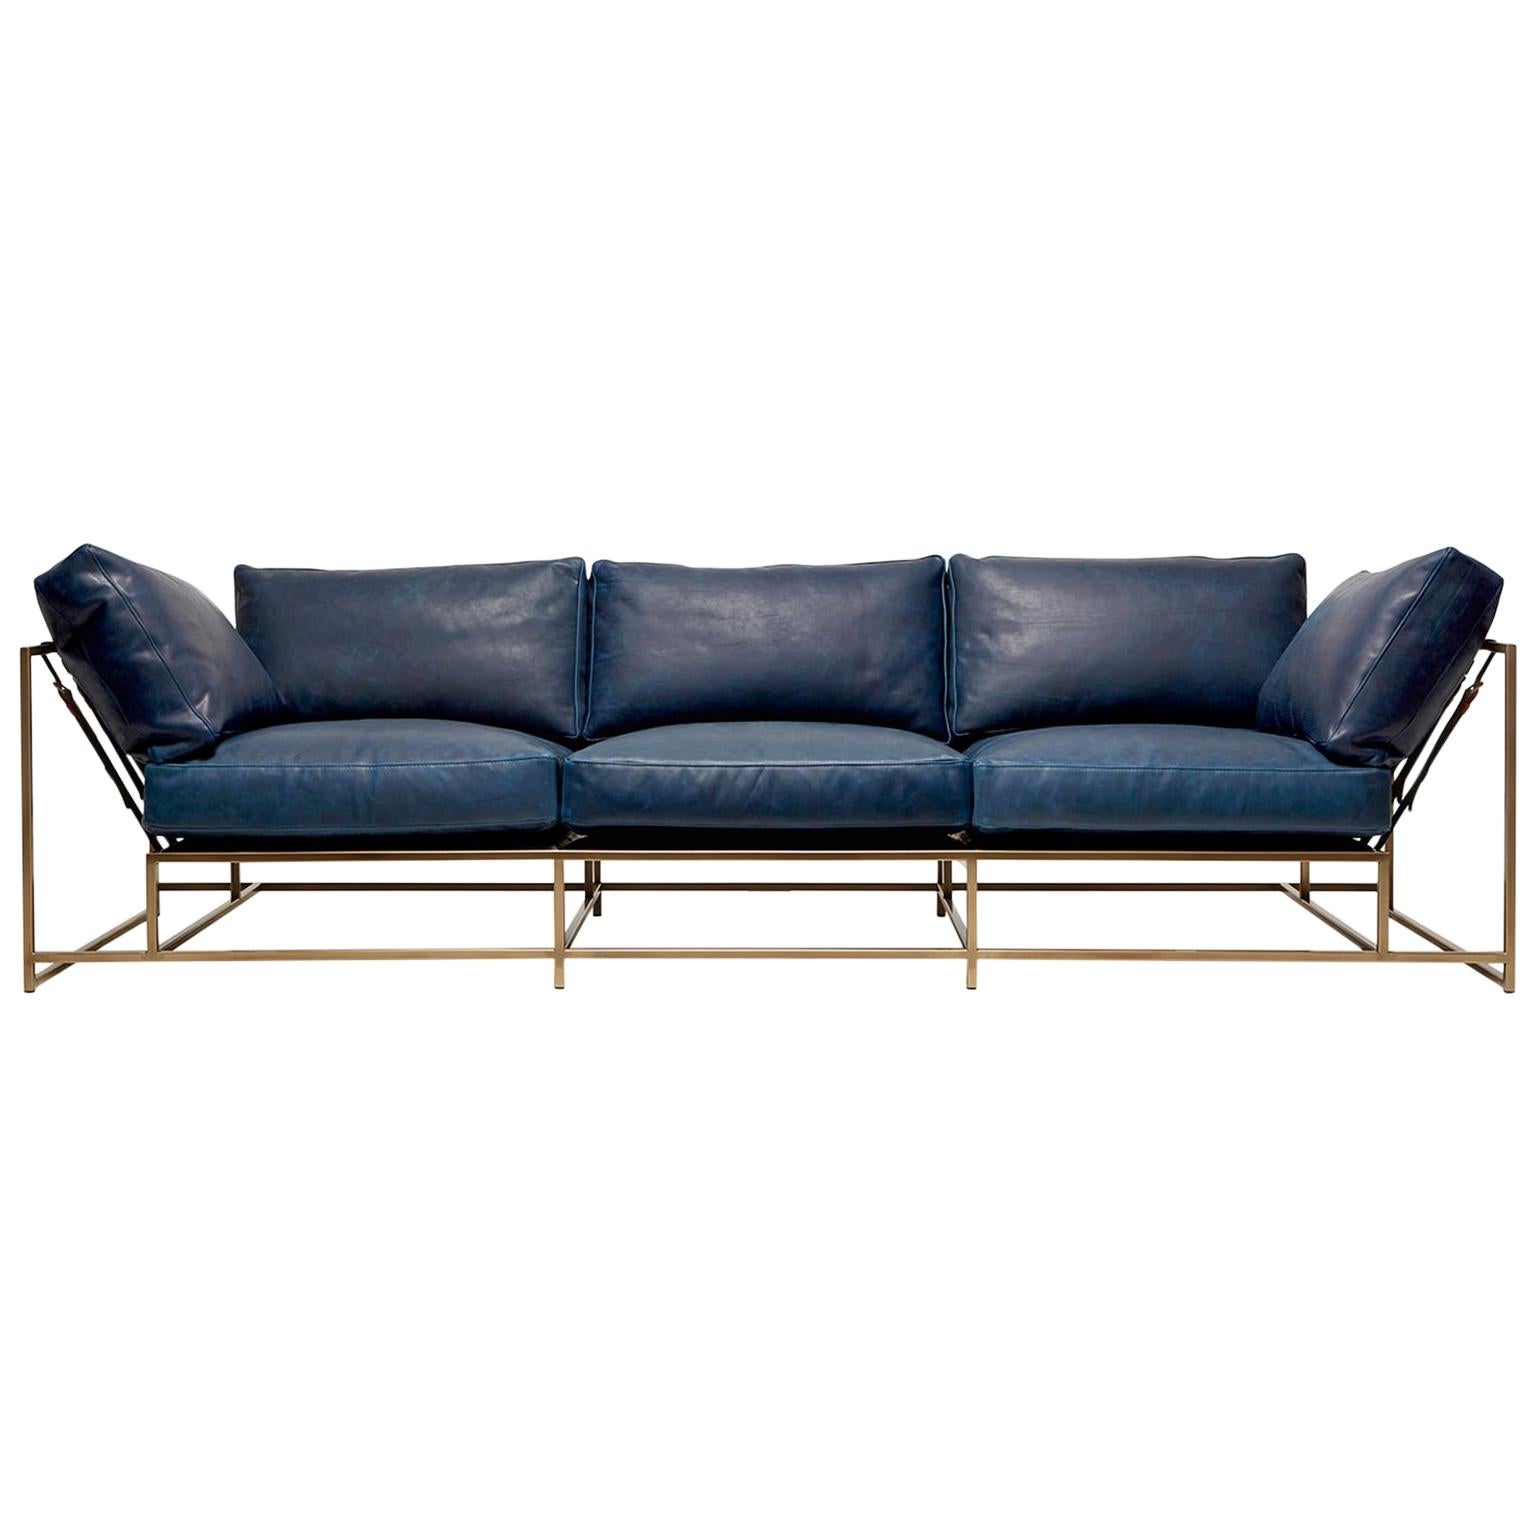 Waxed Navy Leather & Antique Brass Sofa